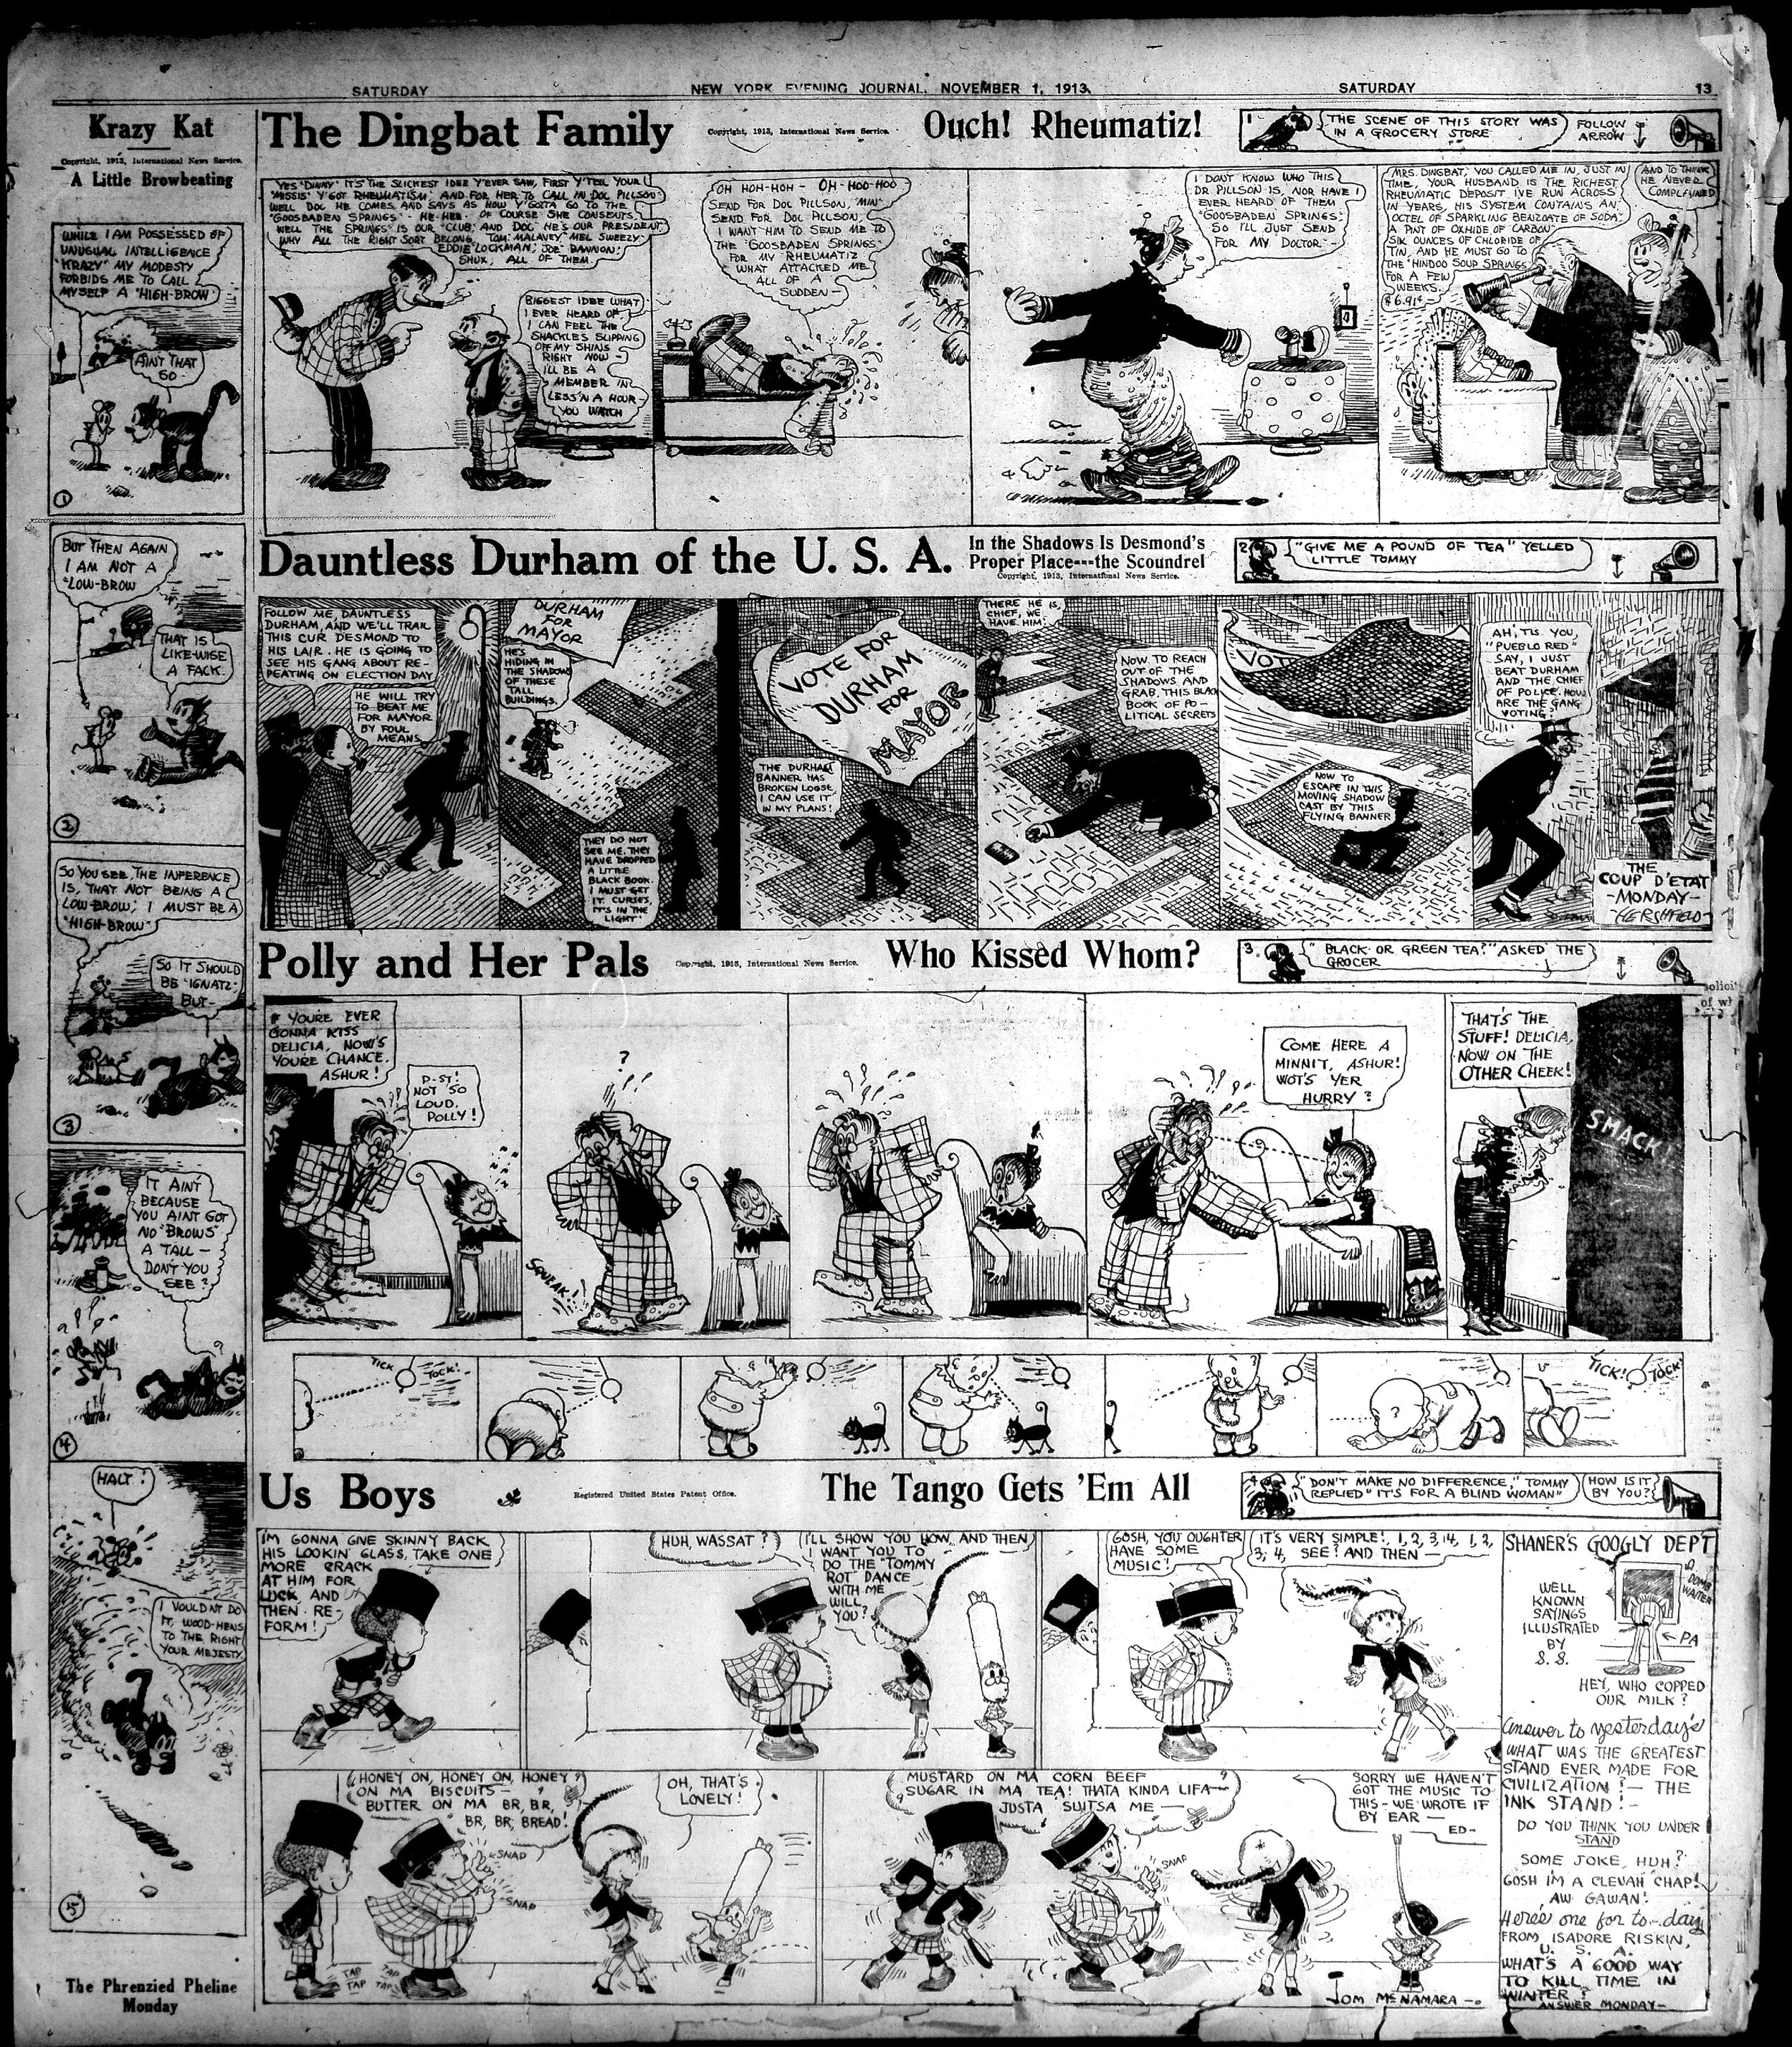 13-nyej-11-1-1913-comics-page-with-rheumatism-gag-in-dingbat-family.jpg